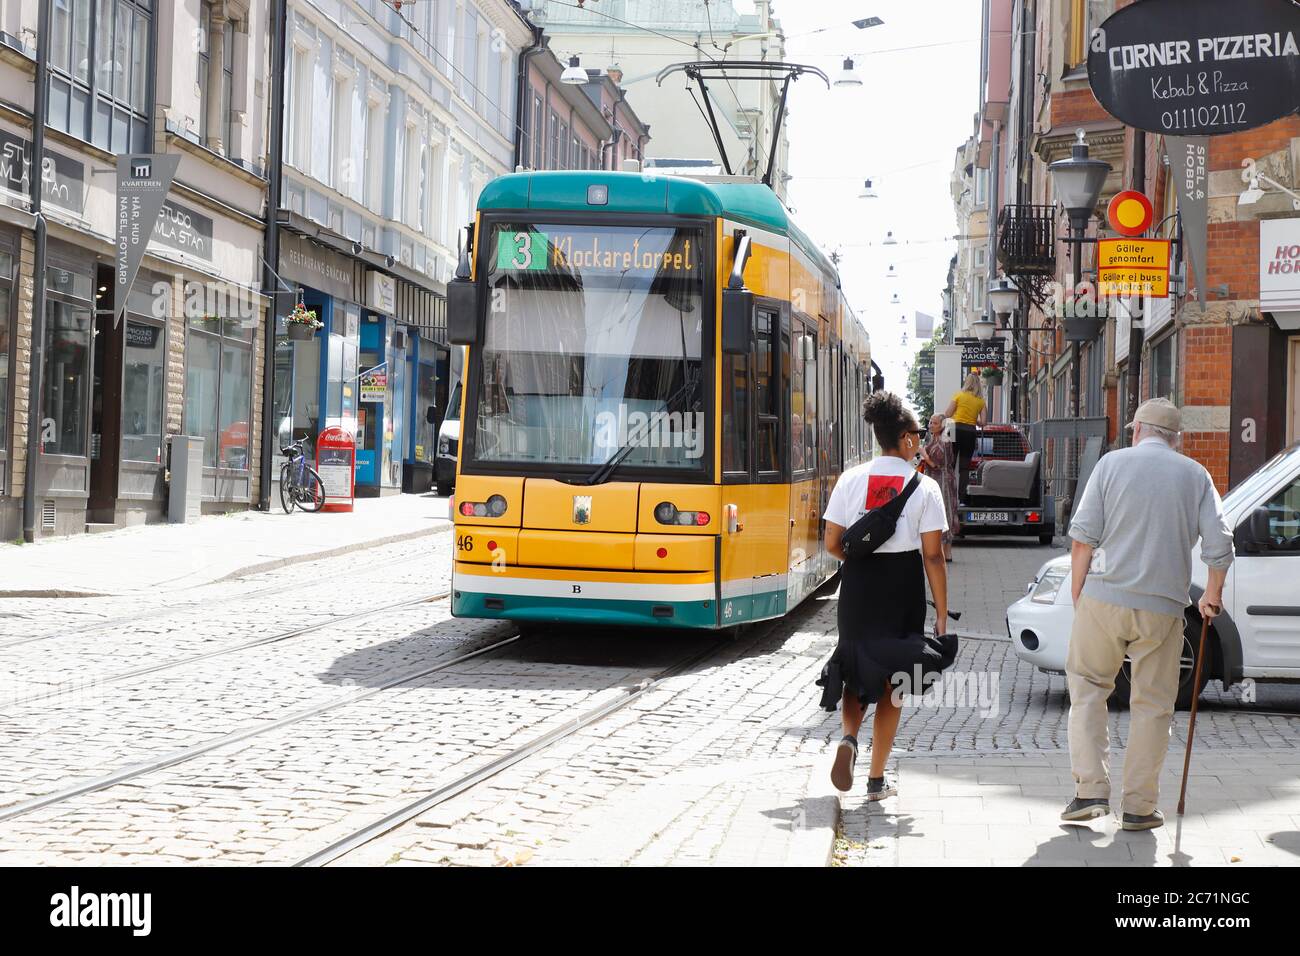 Norrkoping, Sweden - July 3, 2020: Yellow tram in service on line 3 at the Drottninggatan street. Stock Photo